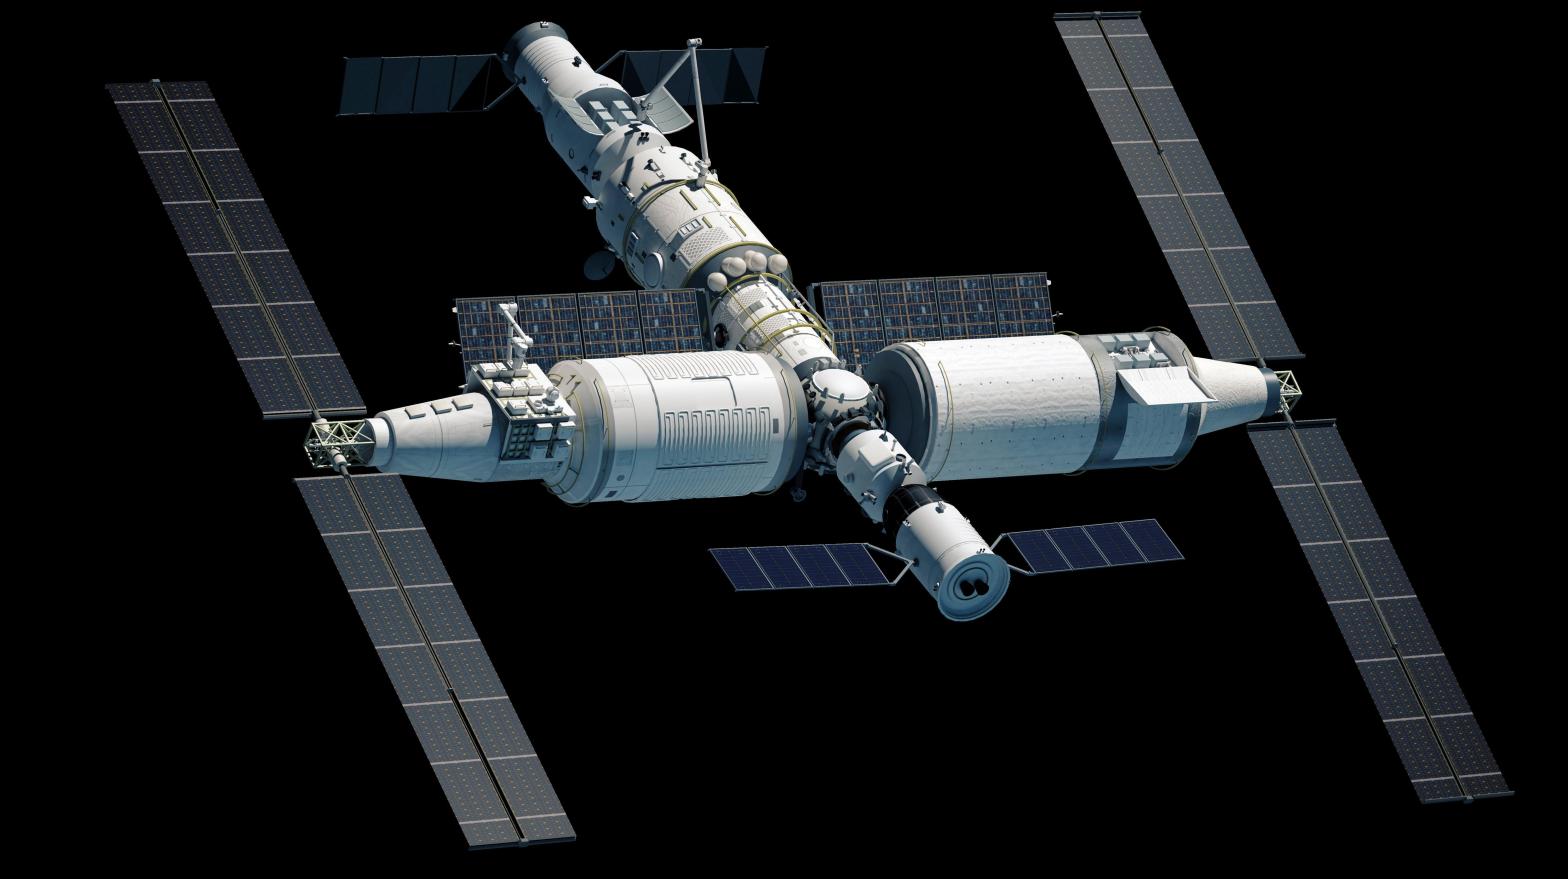 An illustration of the Tiangong Space Station. (Illustration: Adrian Mann, AP)